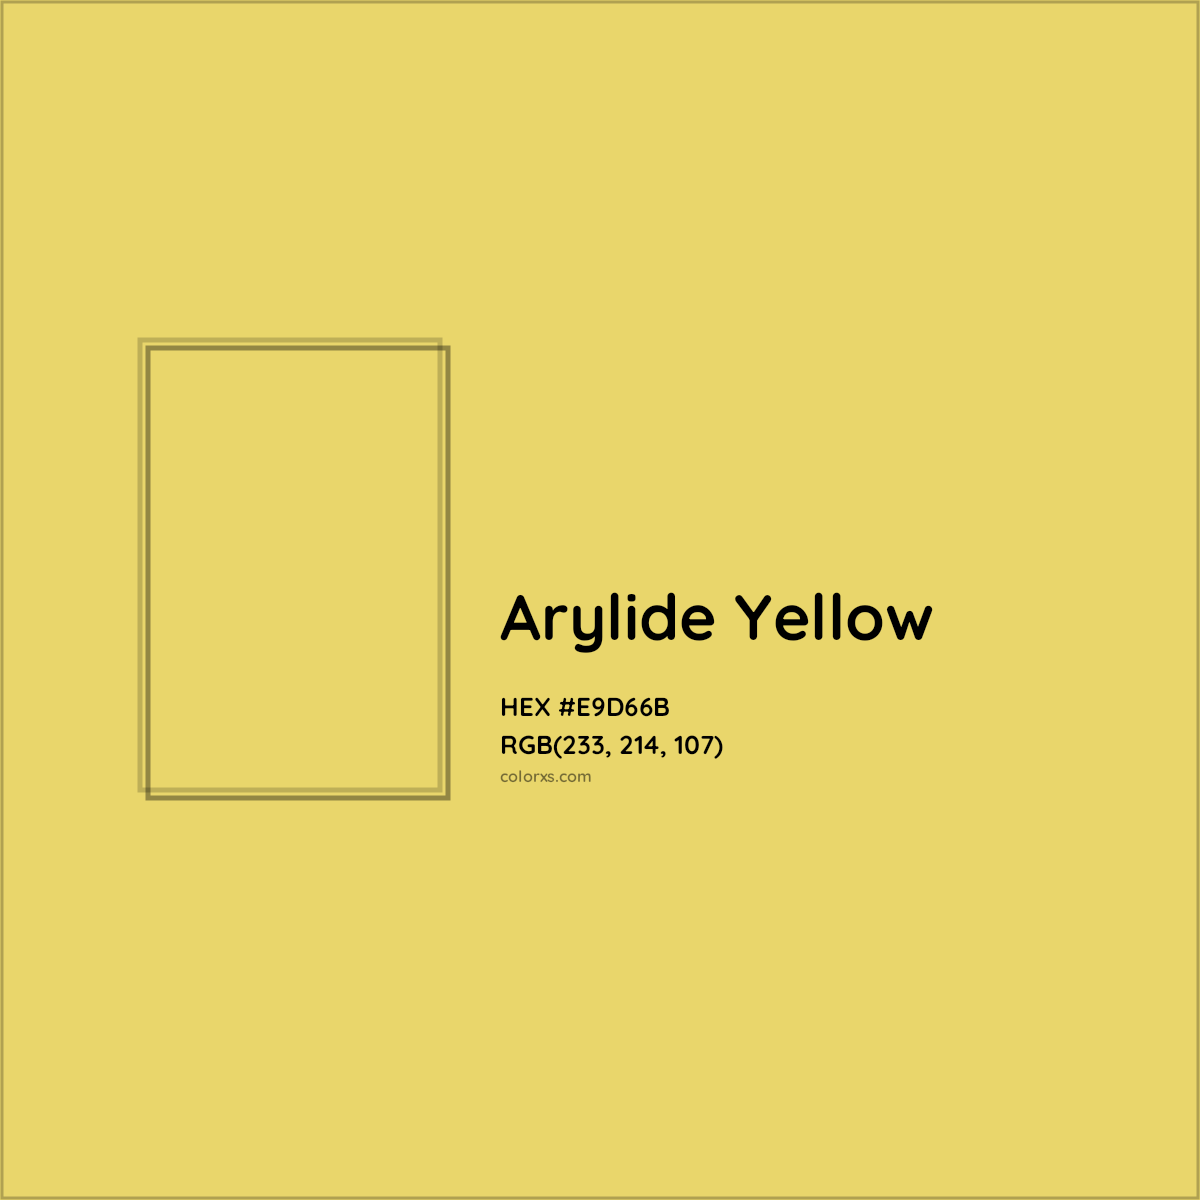 HEX #E9D66B Arylide Yellow Color - Color Code